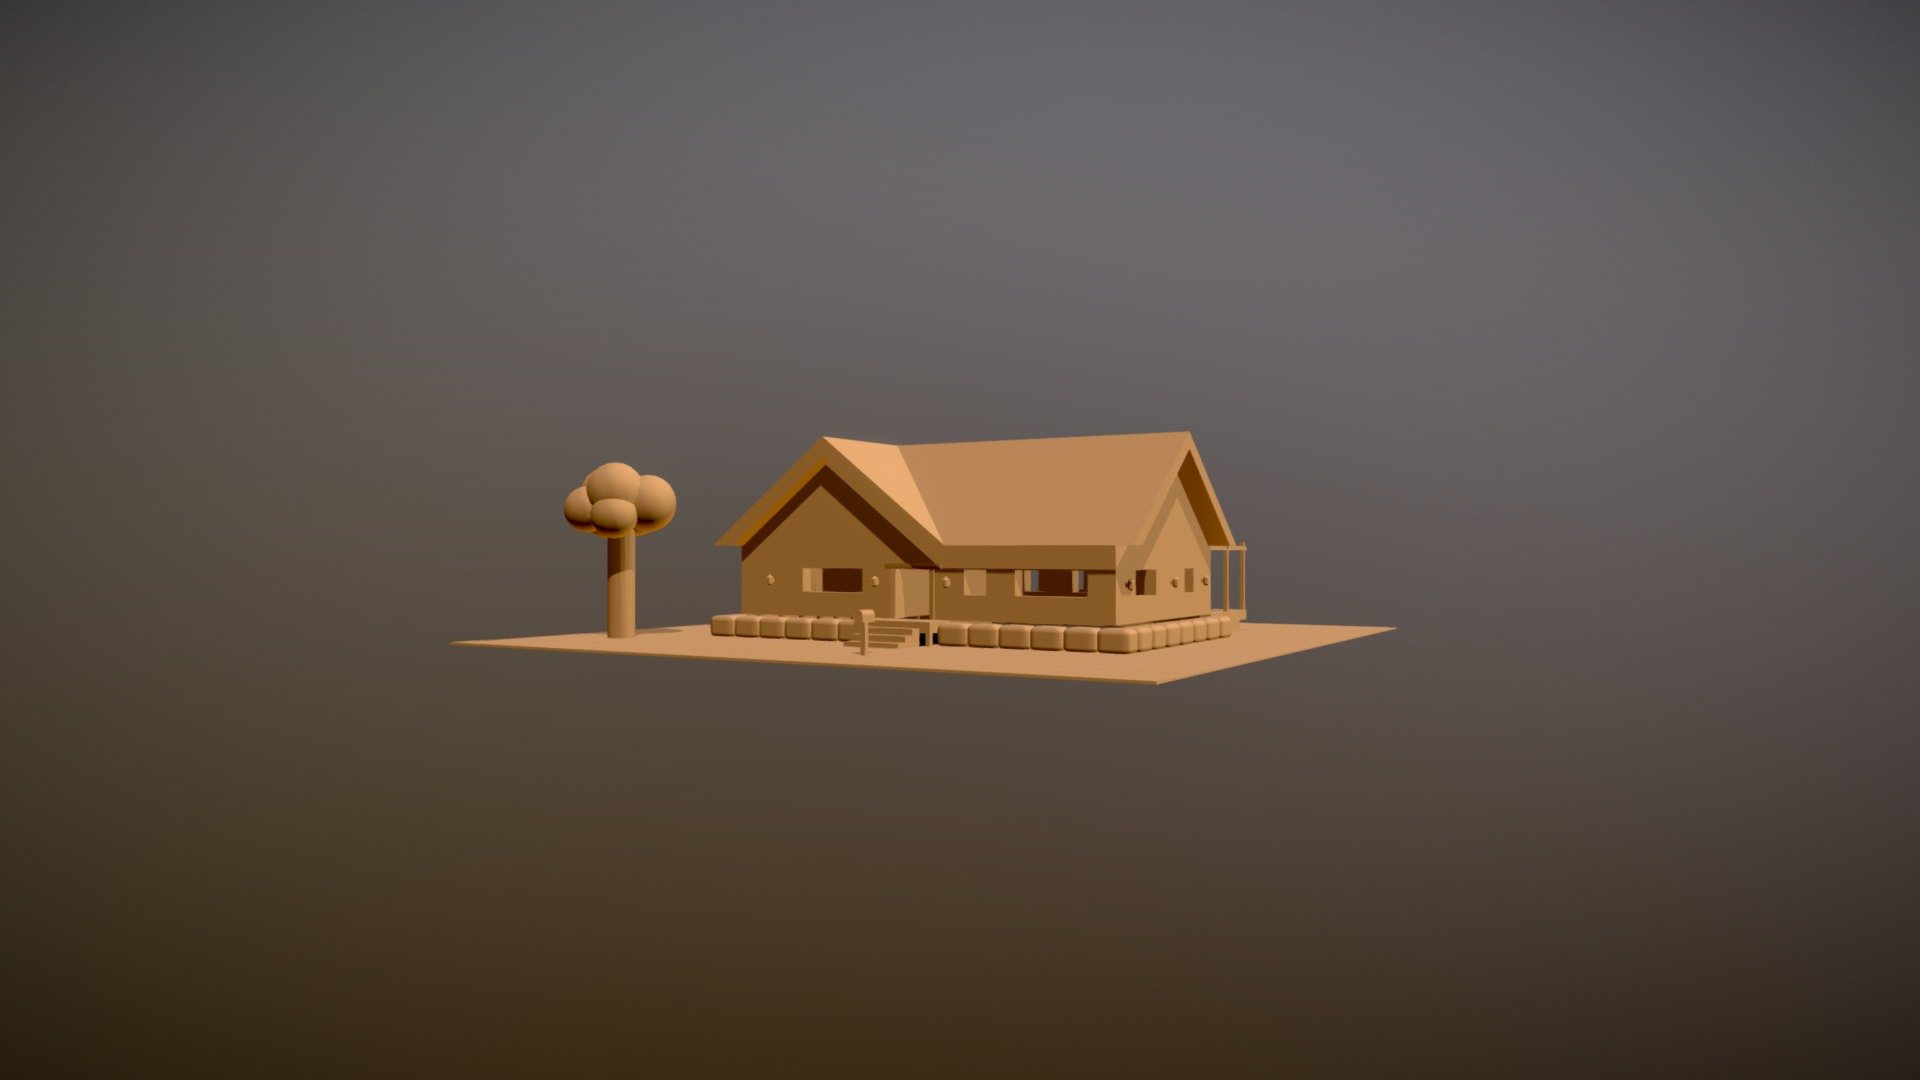 TinkerCad House Assignment